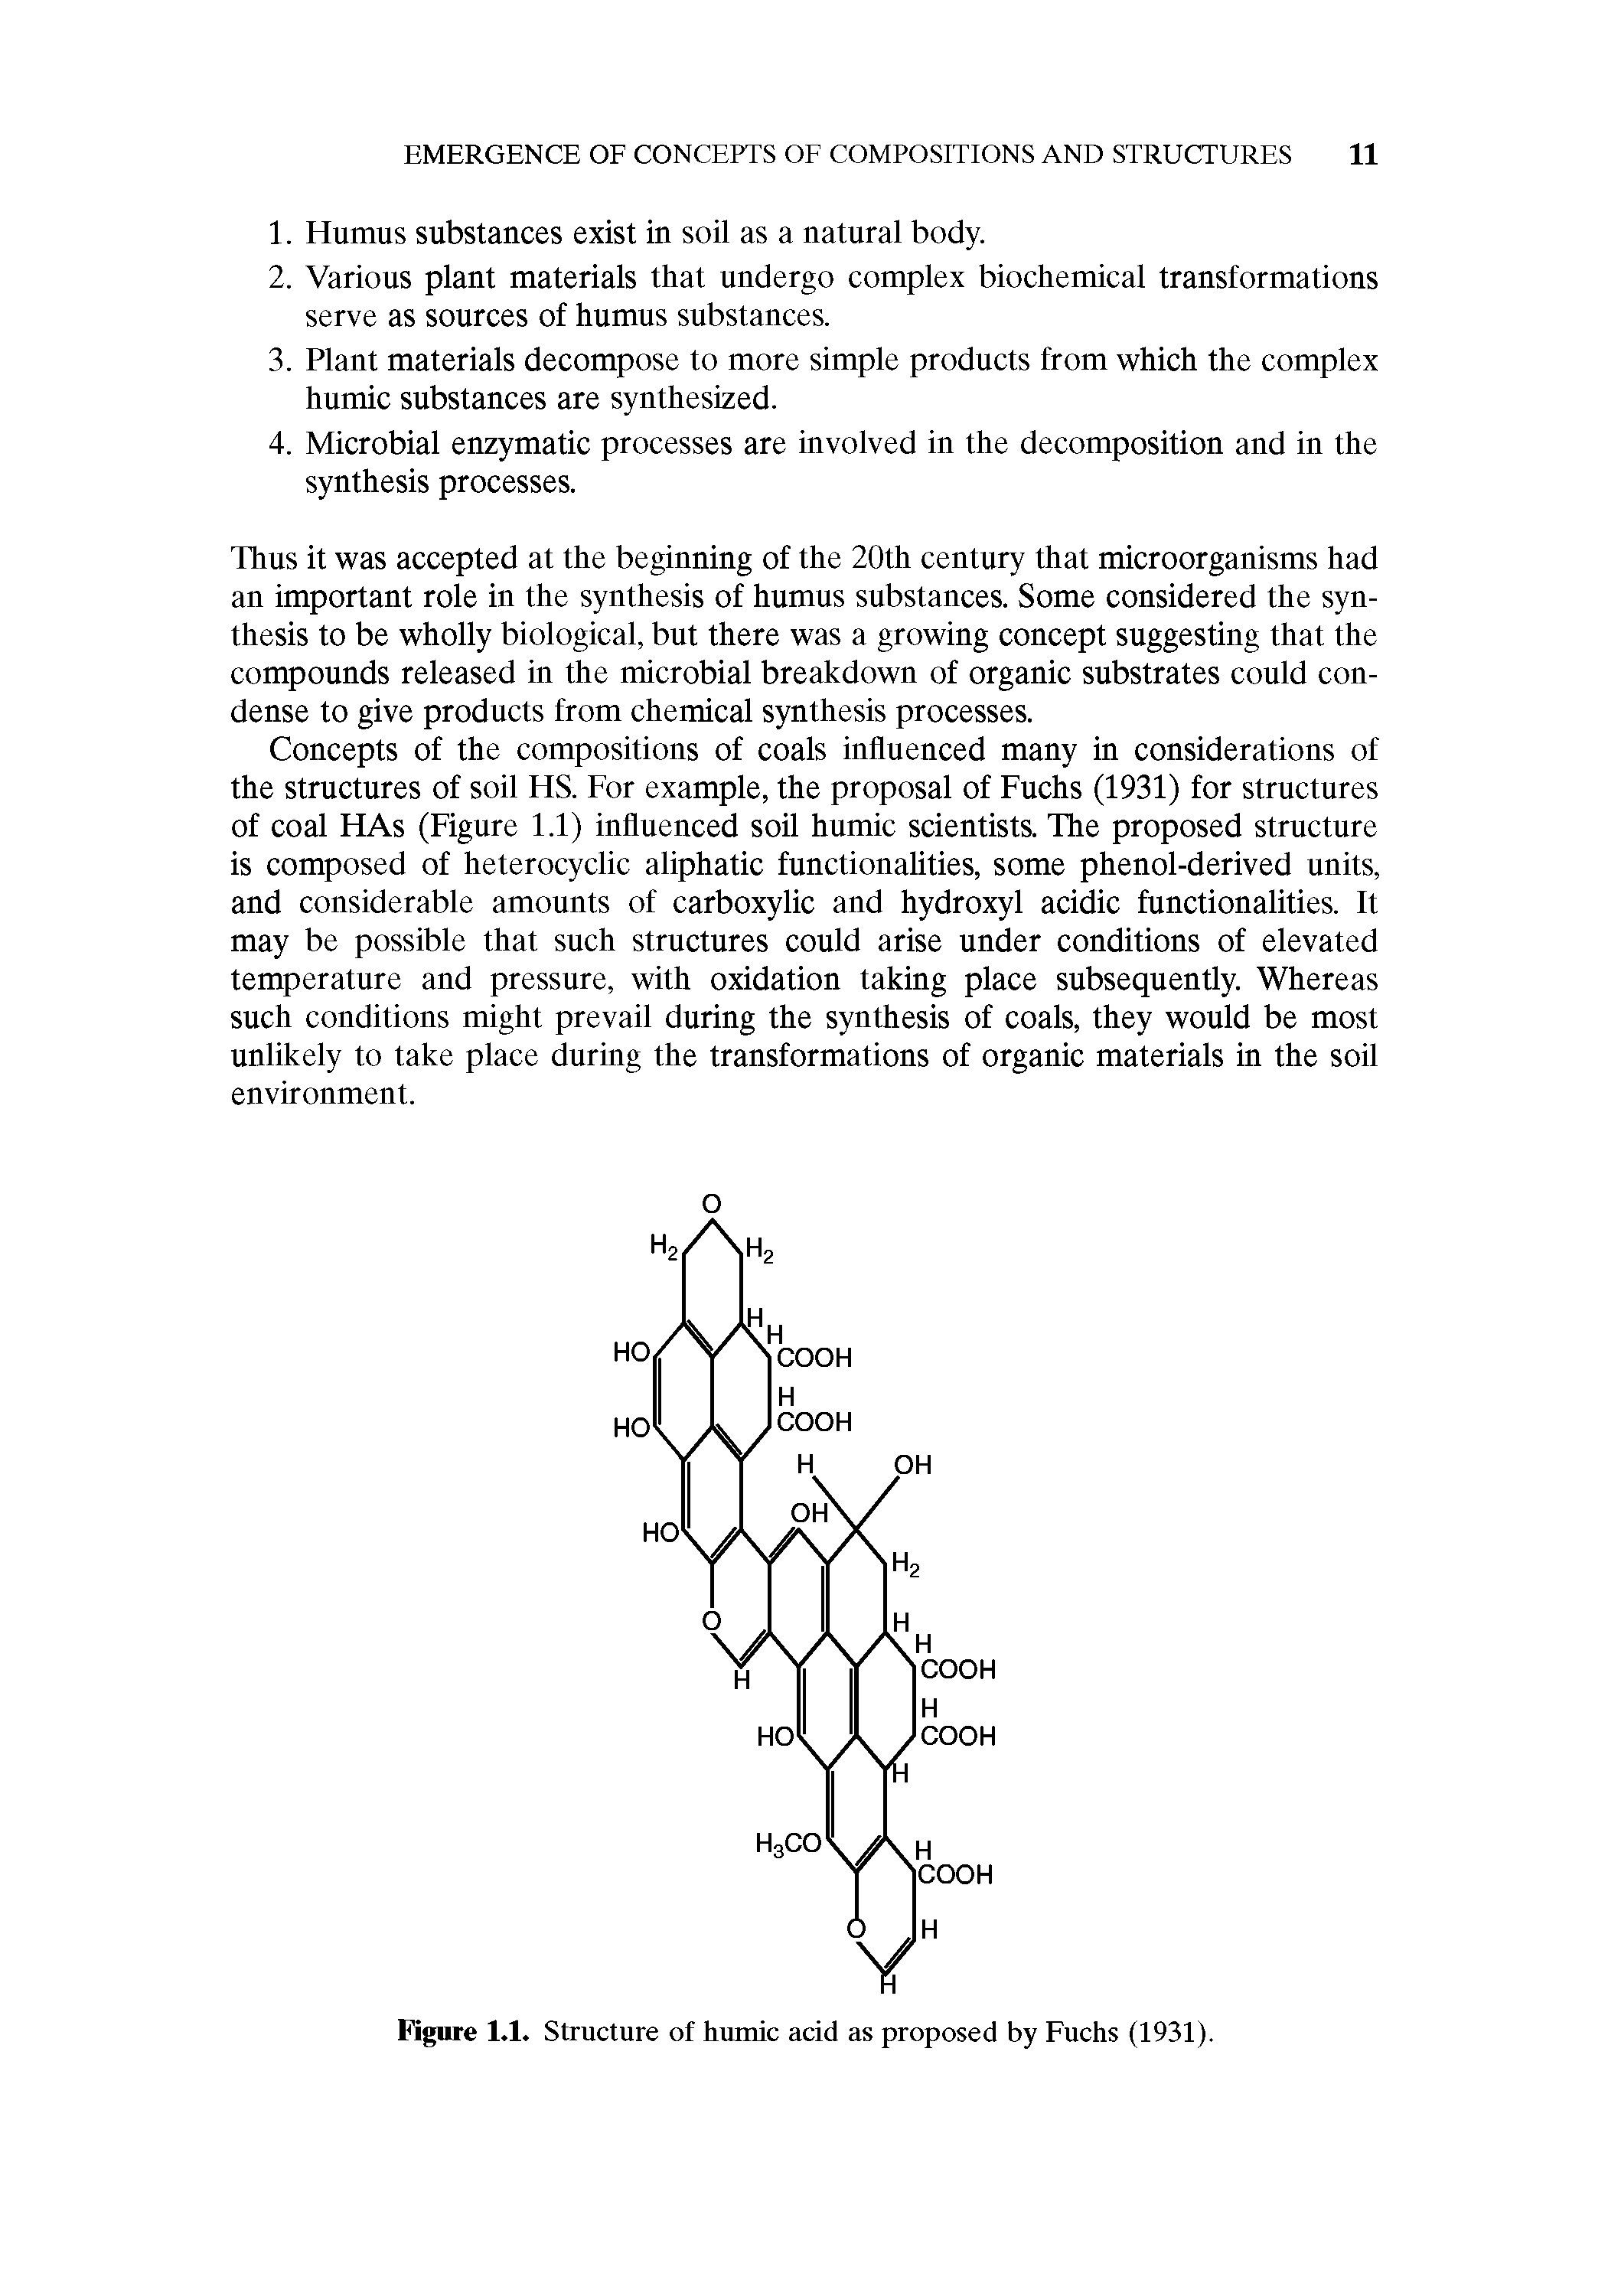 Figure 1.1. Structure of humic acid as proposed by Fuchs (1931).